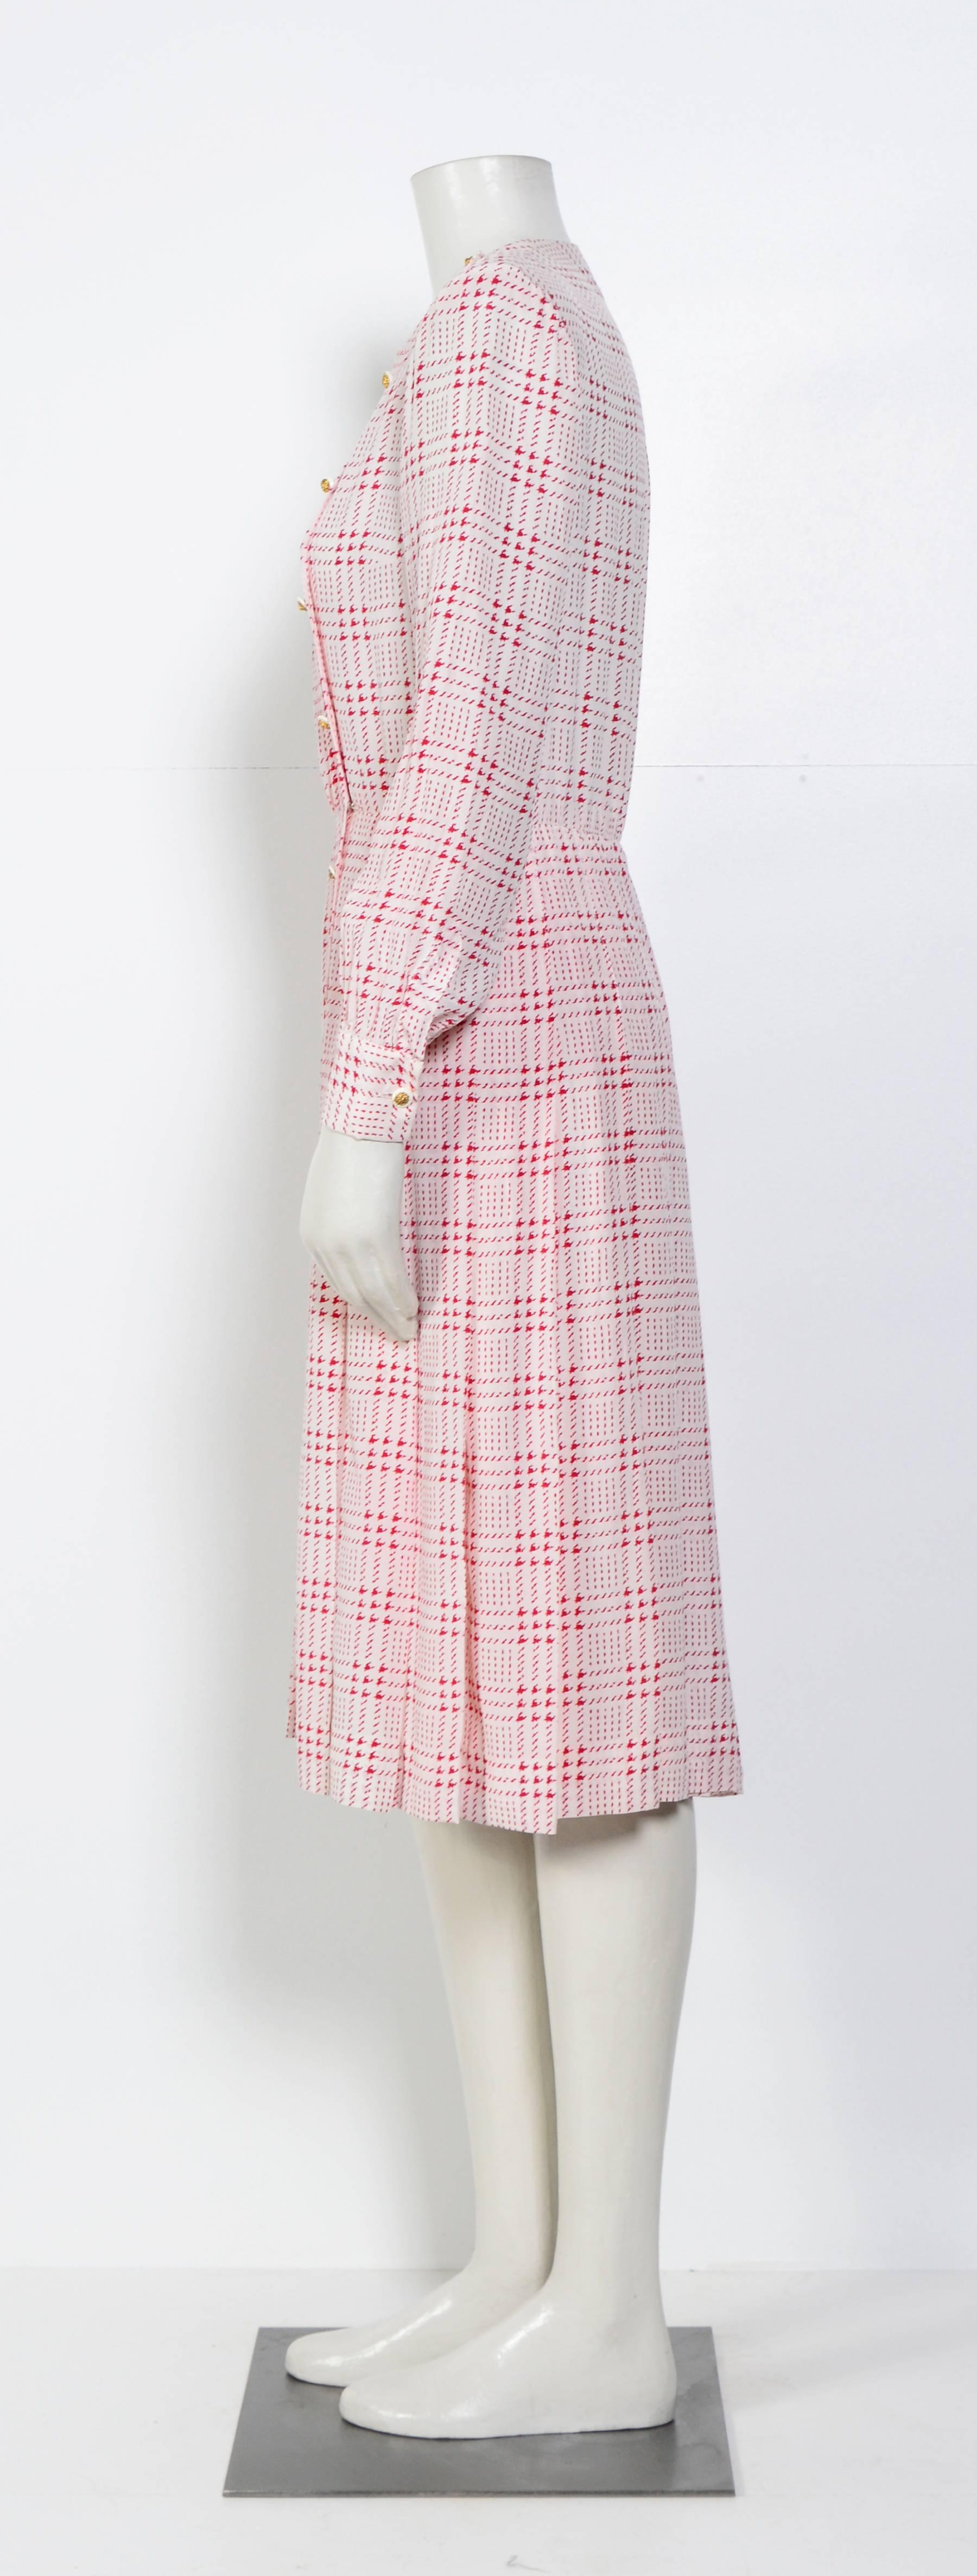 White Chanel vintage 1970s printed white & pink silk dress with matching scarf